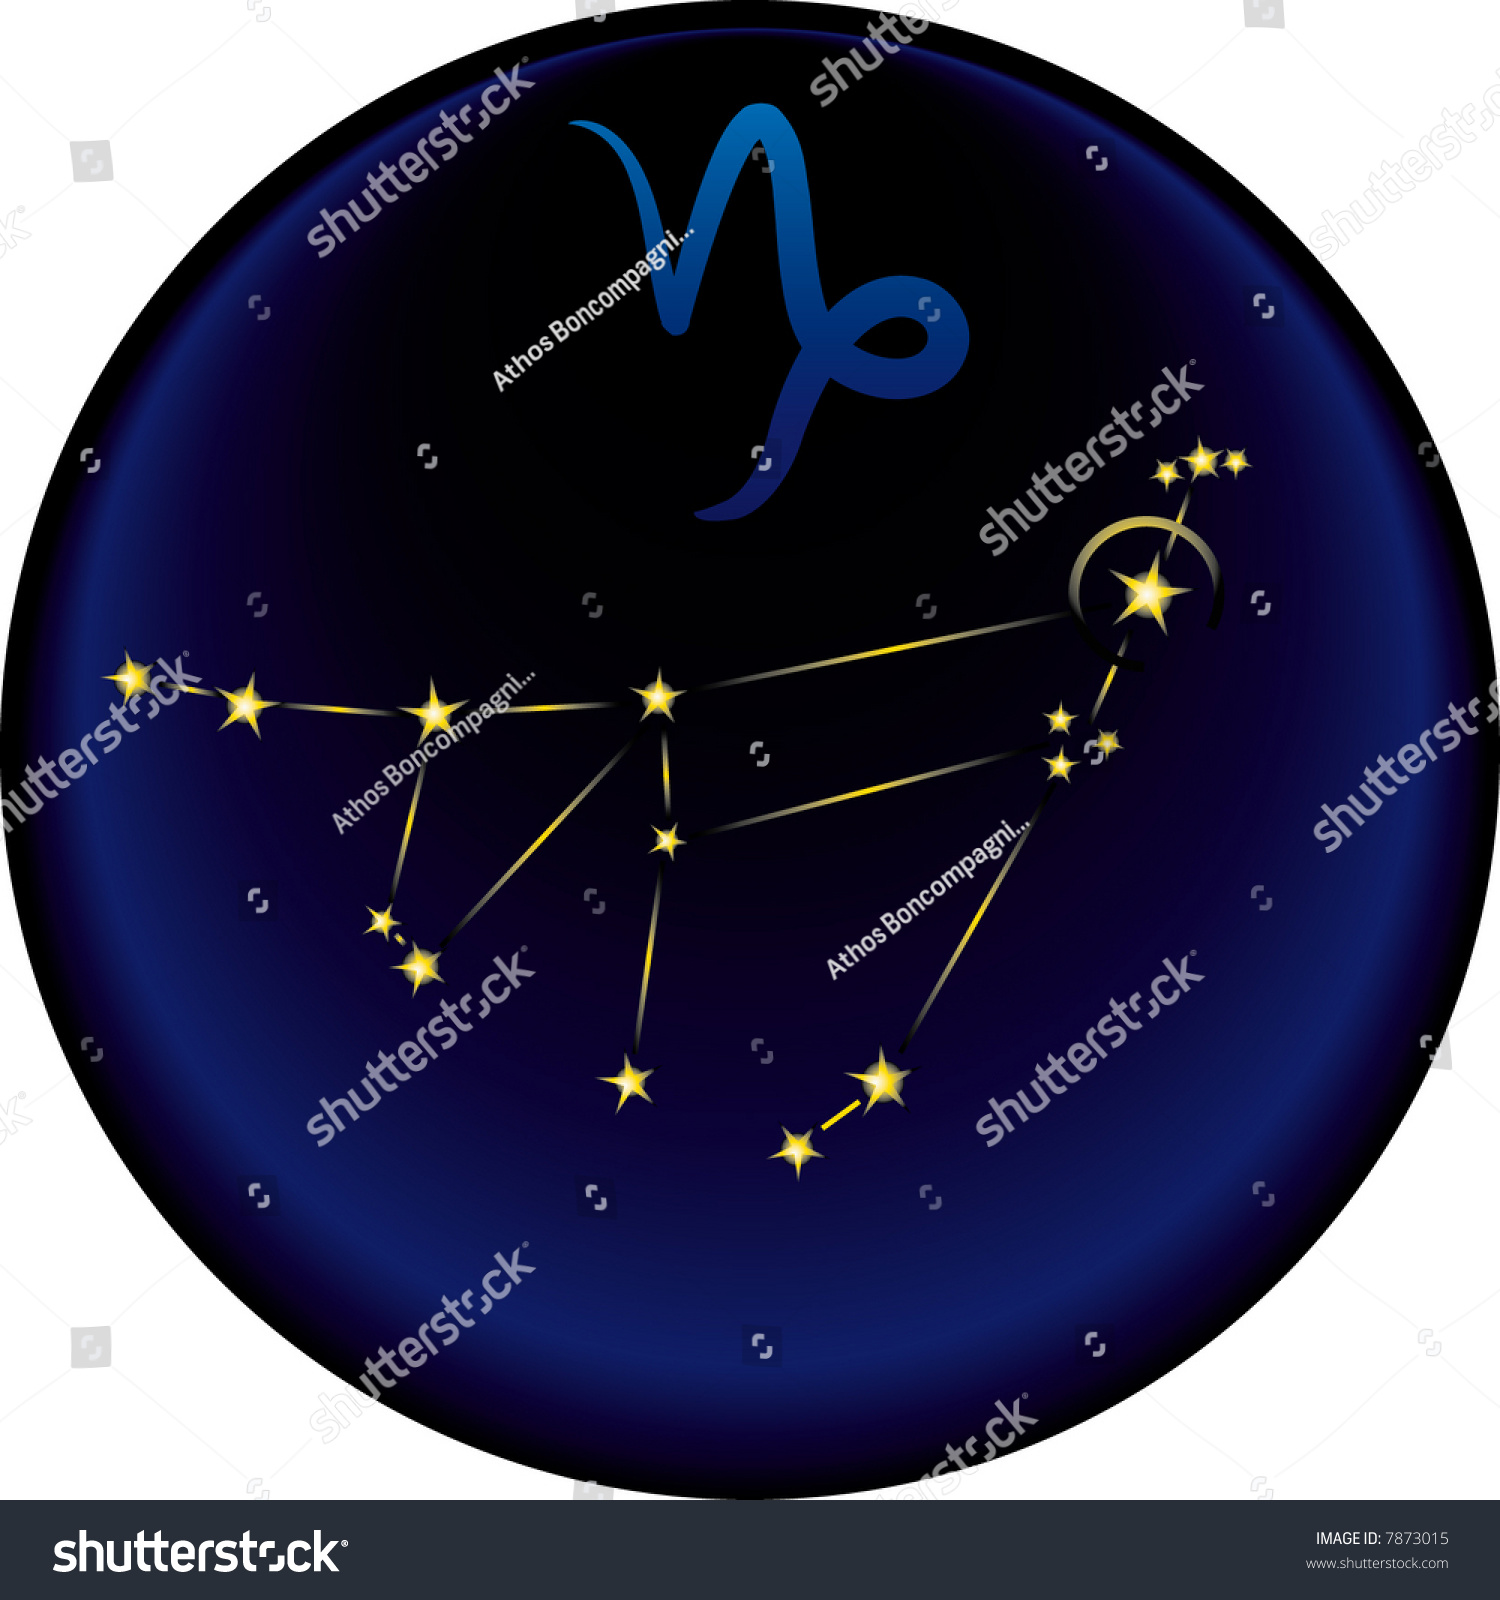 The Capricorn Constellation Plus The Capricorn Astrological Sign Stock ...